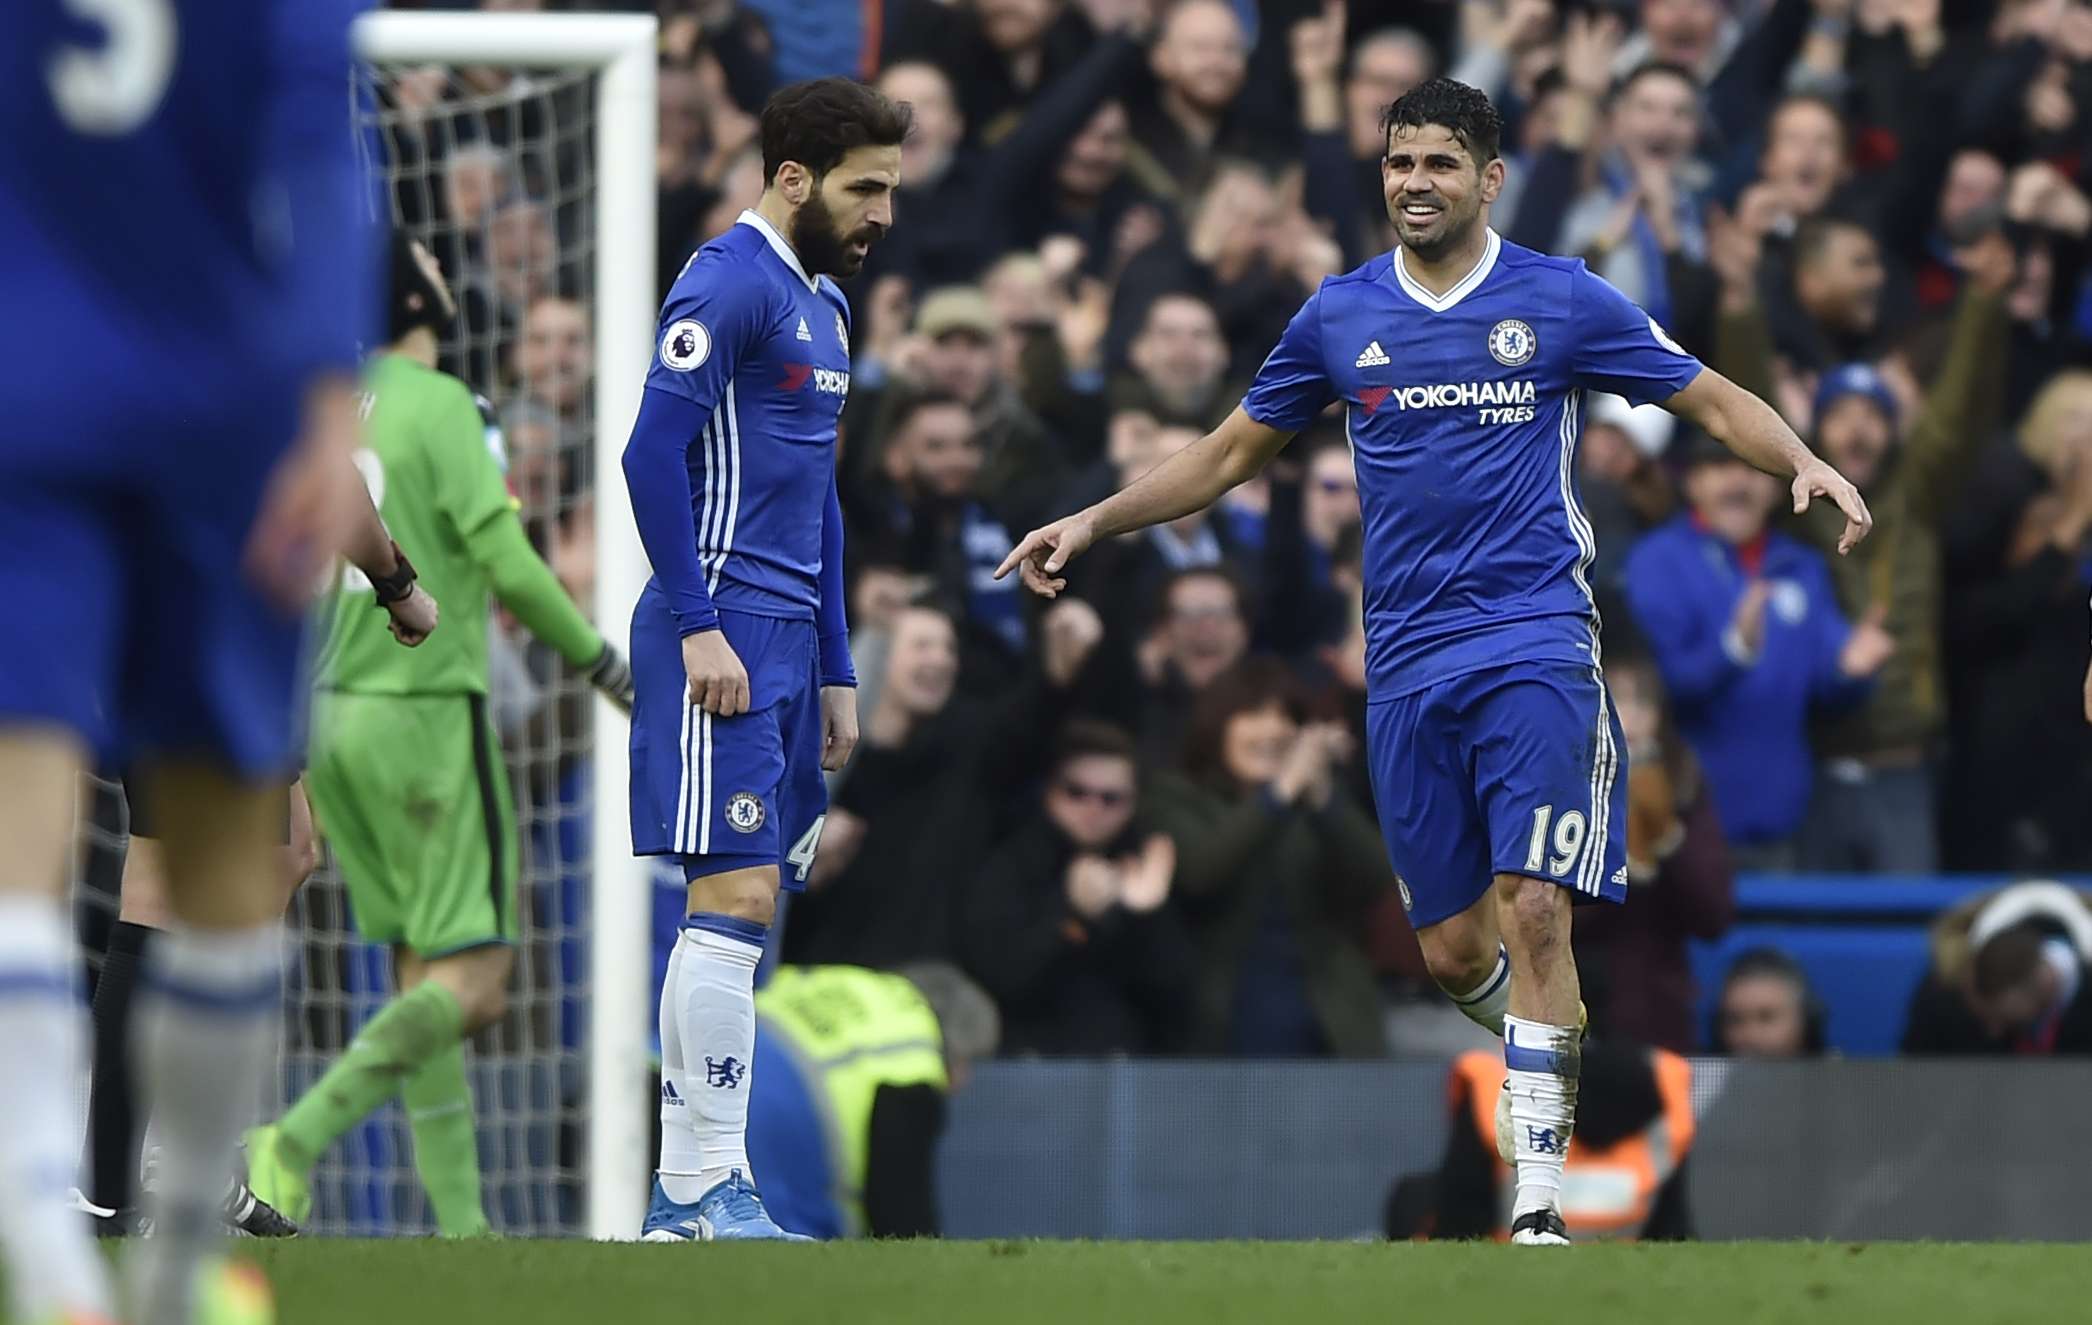 Cesc Fabregas keeps his celebrations muted after scoring Chelsea’s third goal. Photo: Reuters